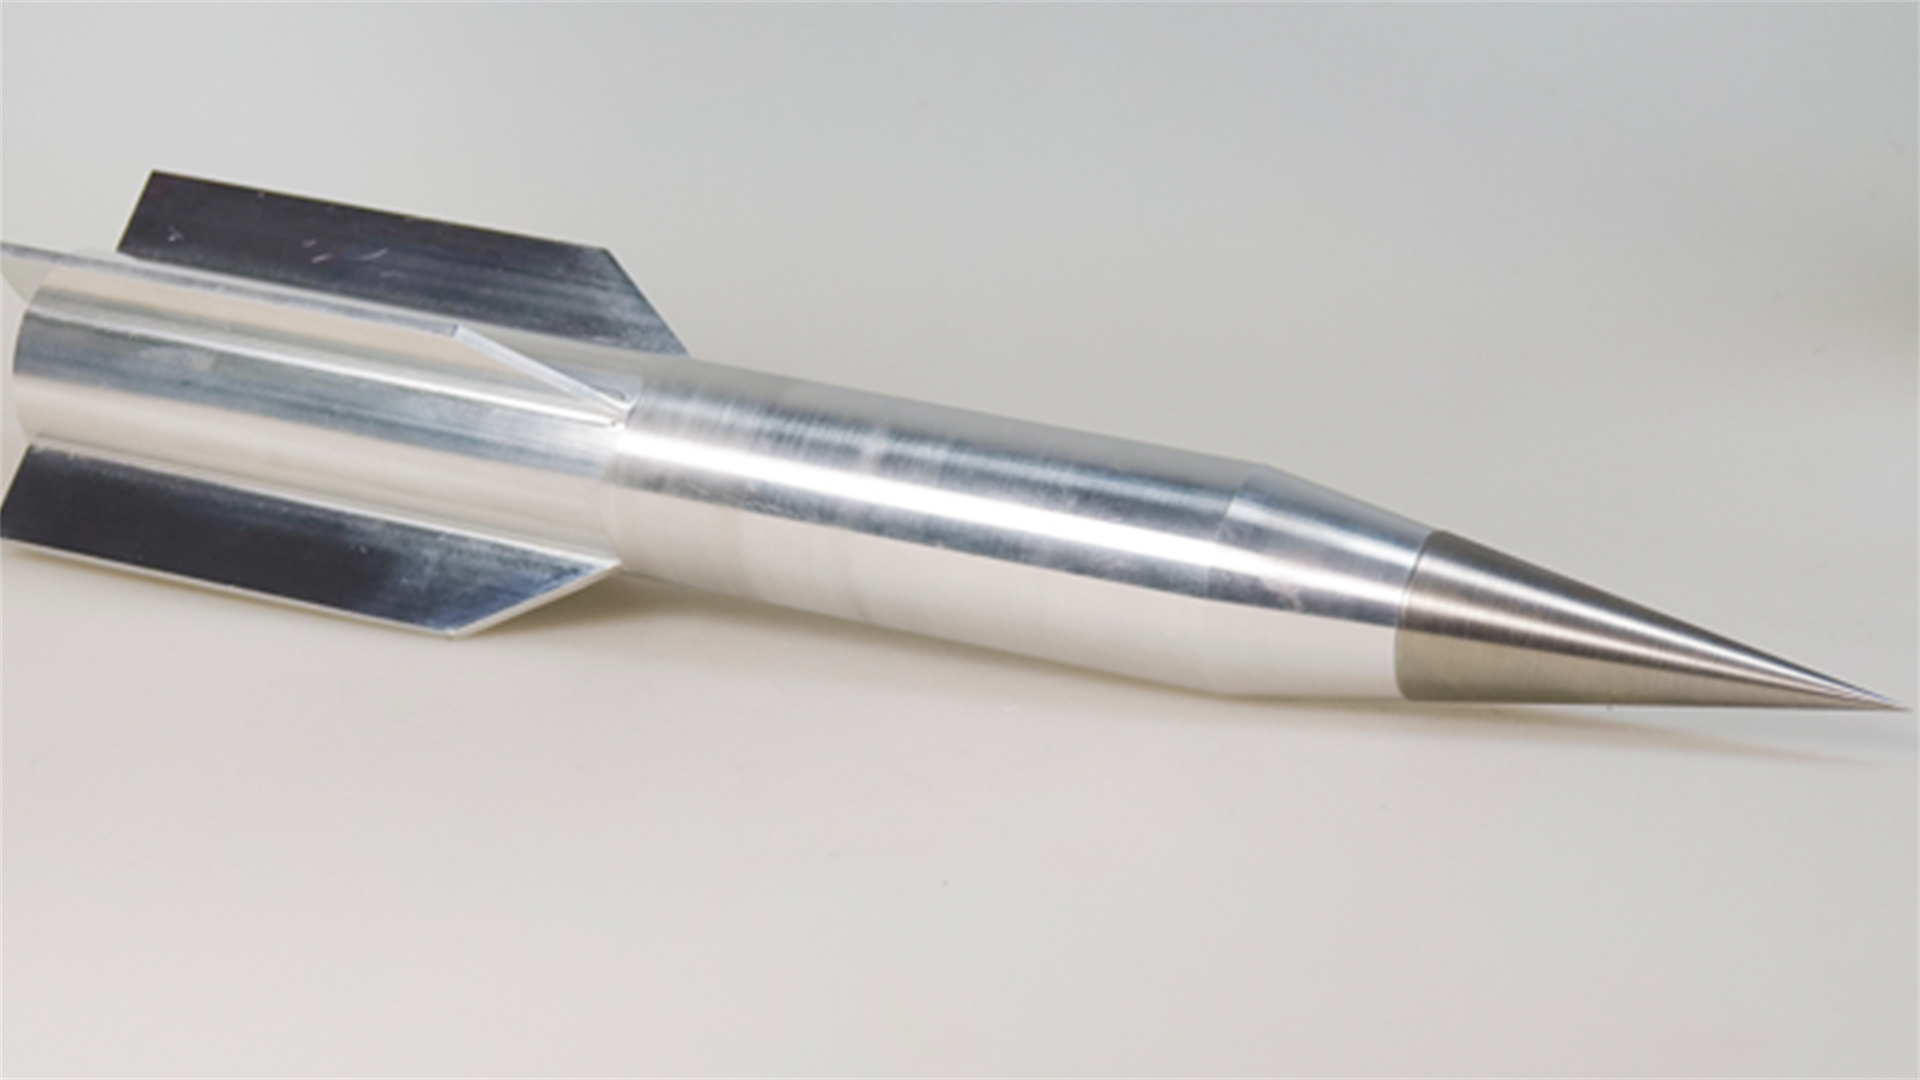 ISL hypersonic projectile. Copyright: ISL